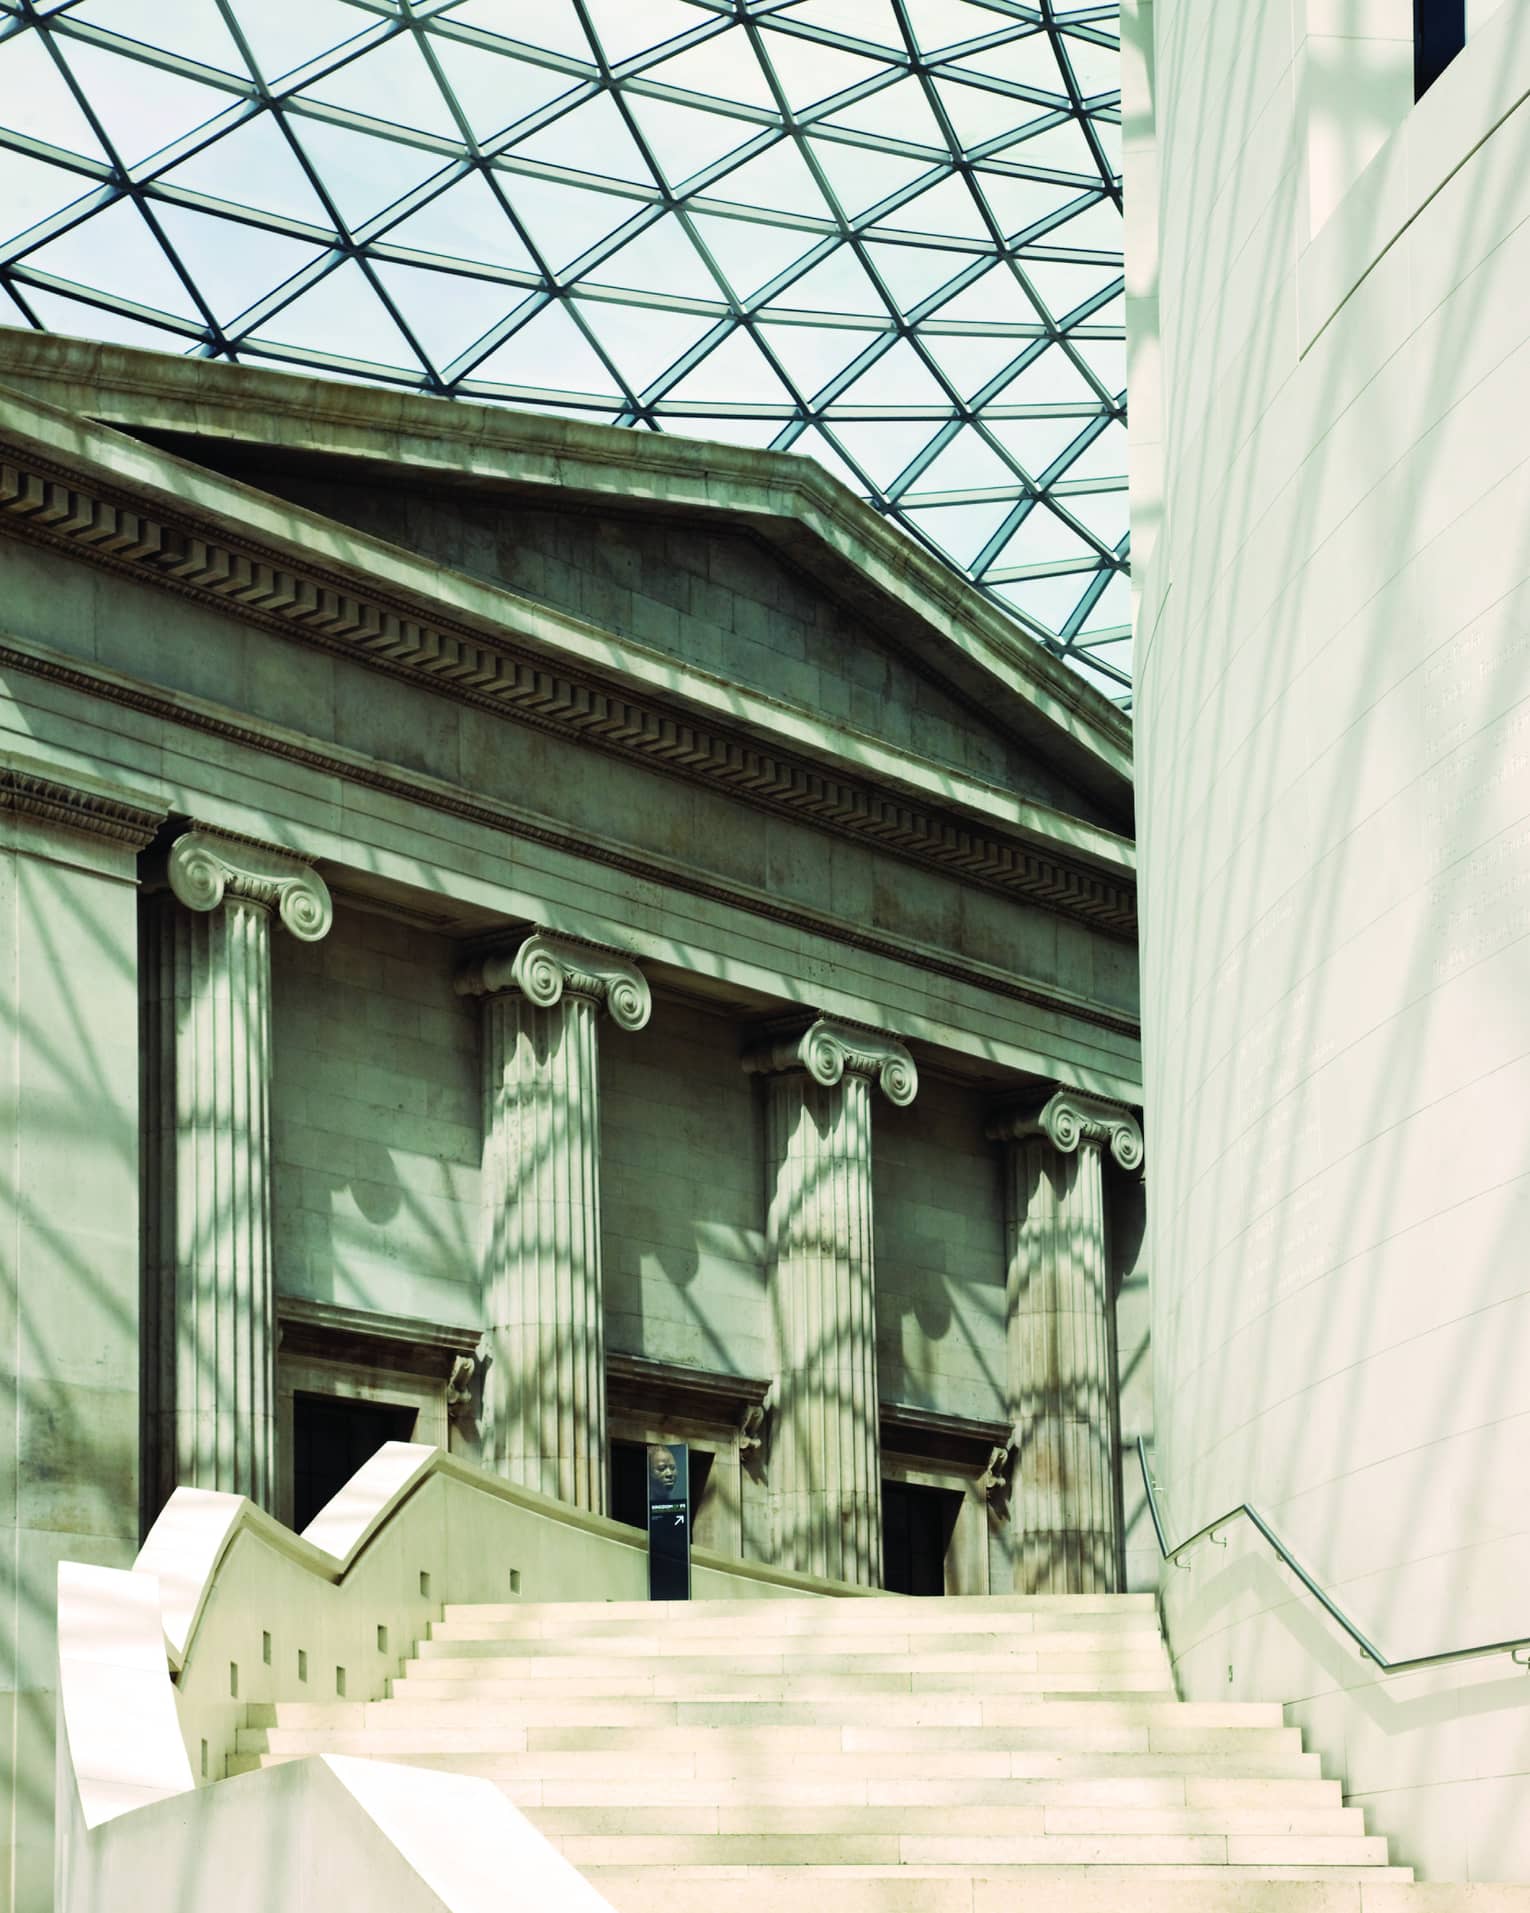 Close-up of façade and staircase in the British Museum courtyard, light through the glass roof leaving criss-cross shadows.